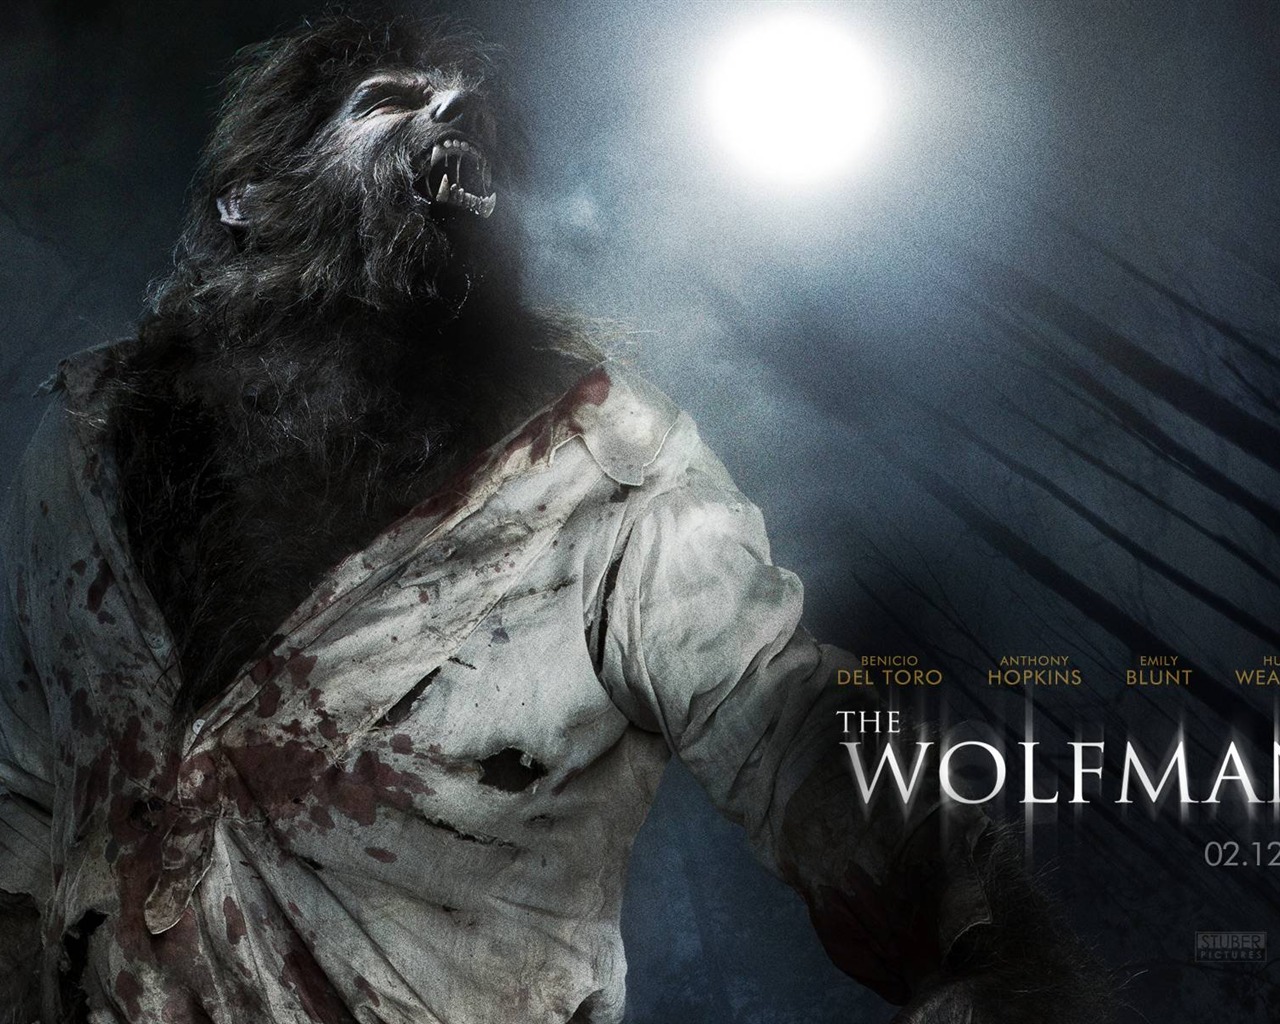 The Wolfman Movie Wallpapers #3 - 1280x1024